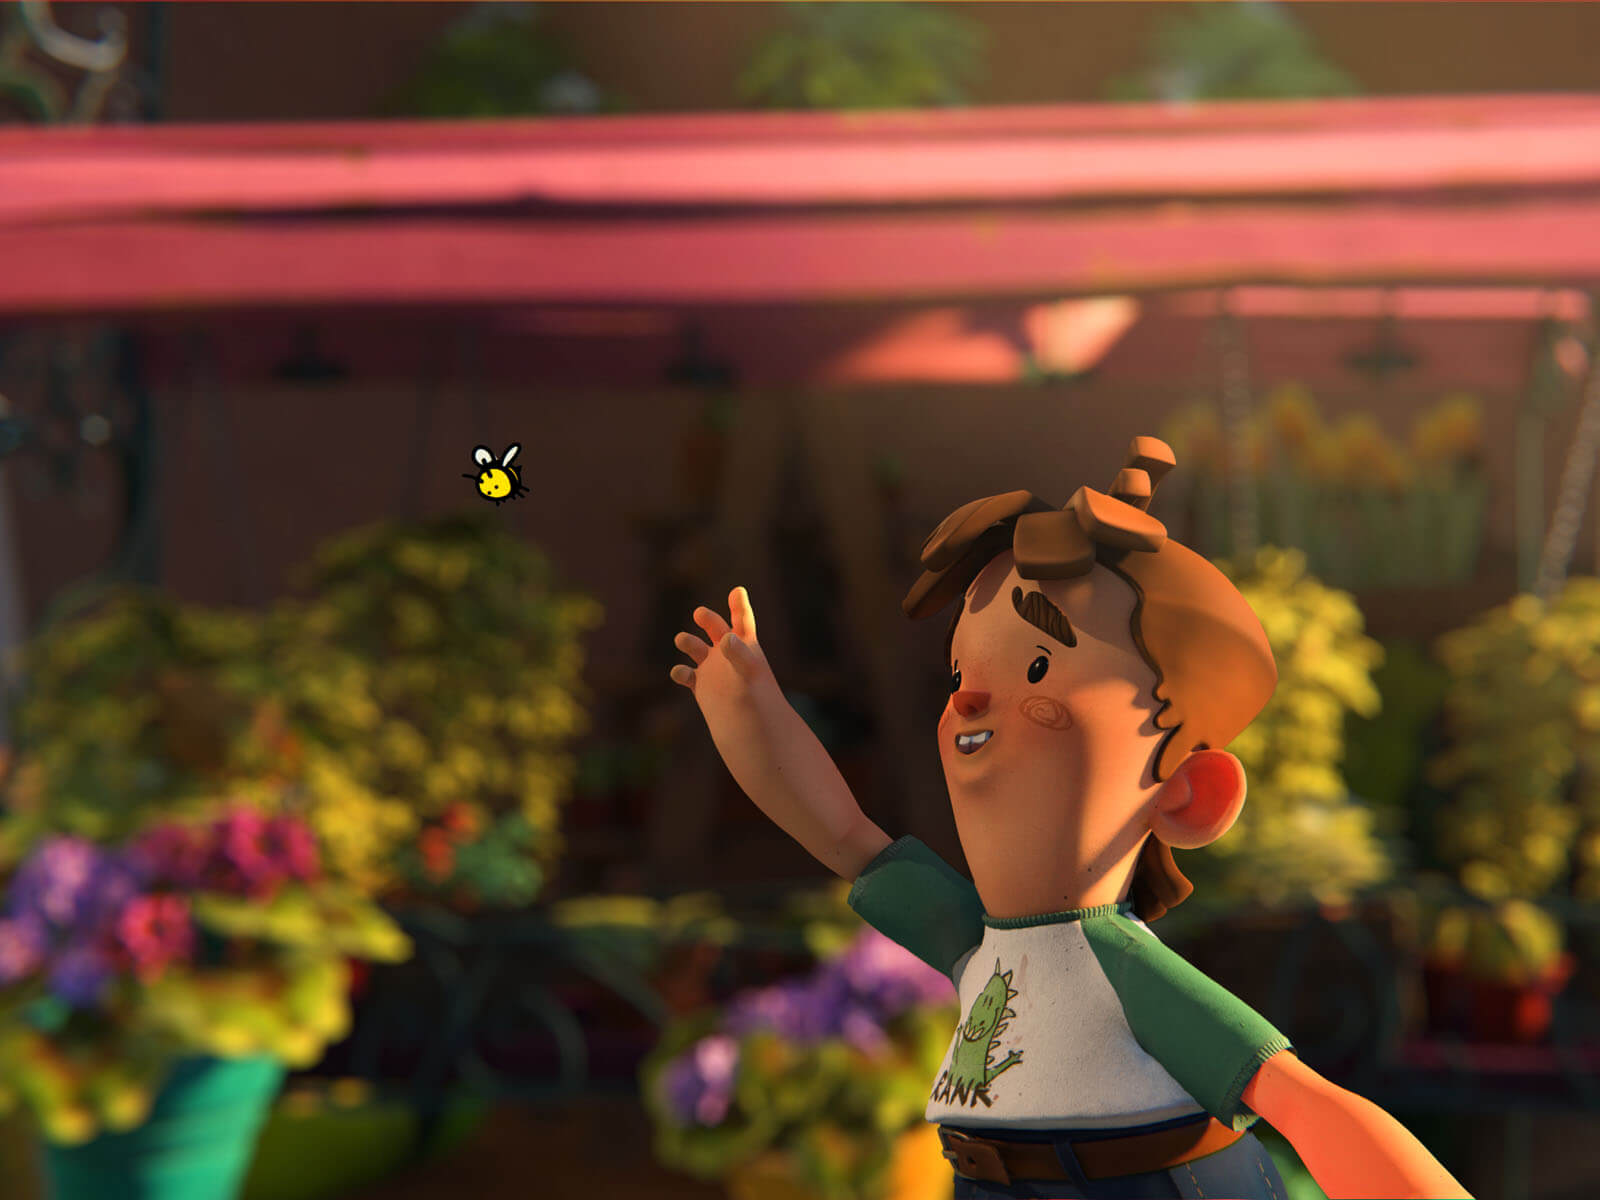 A boy chases a bee in front of an area filled with flora and flowers